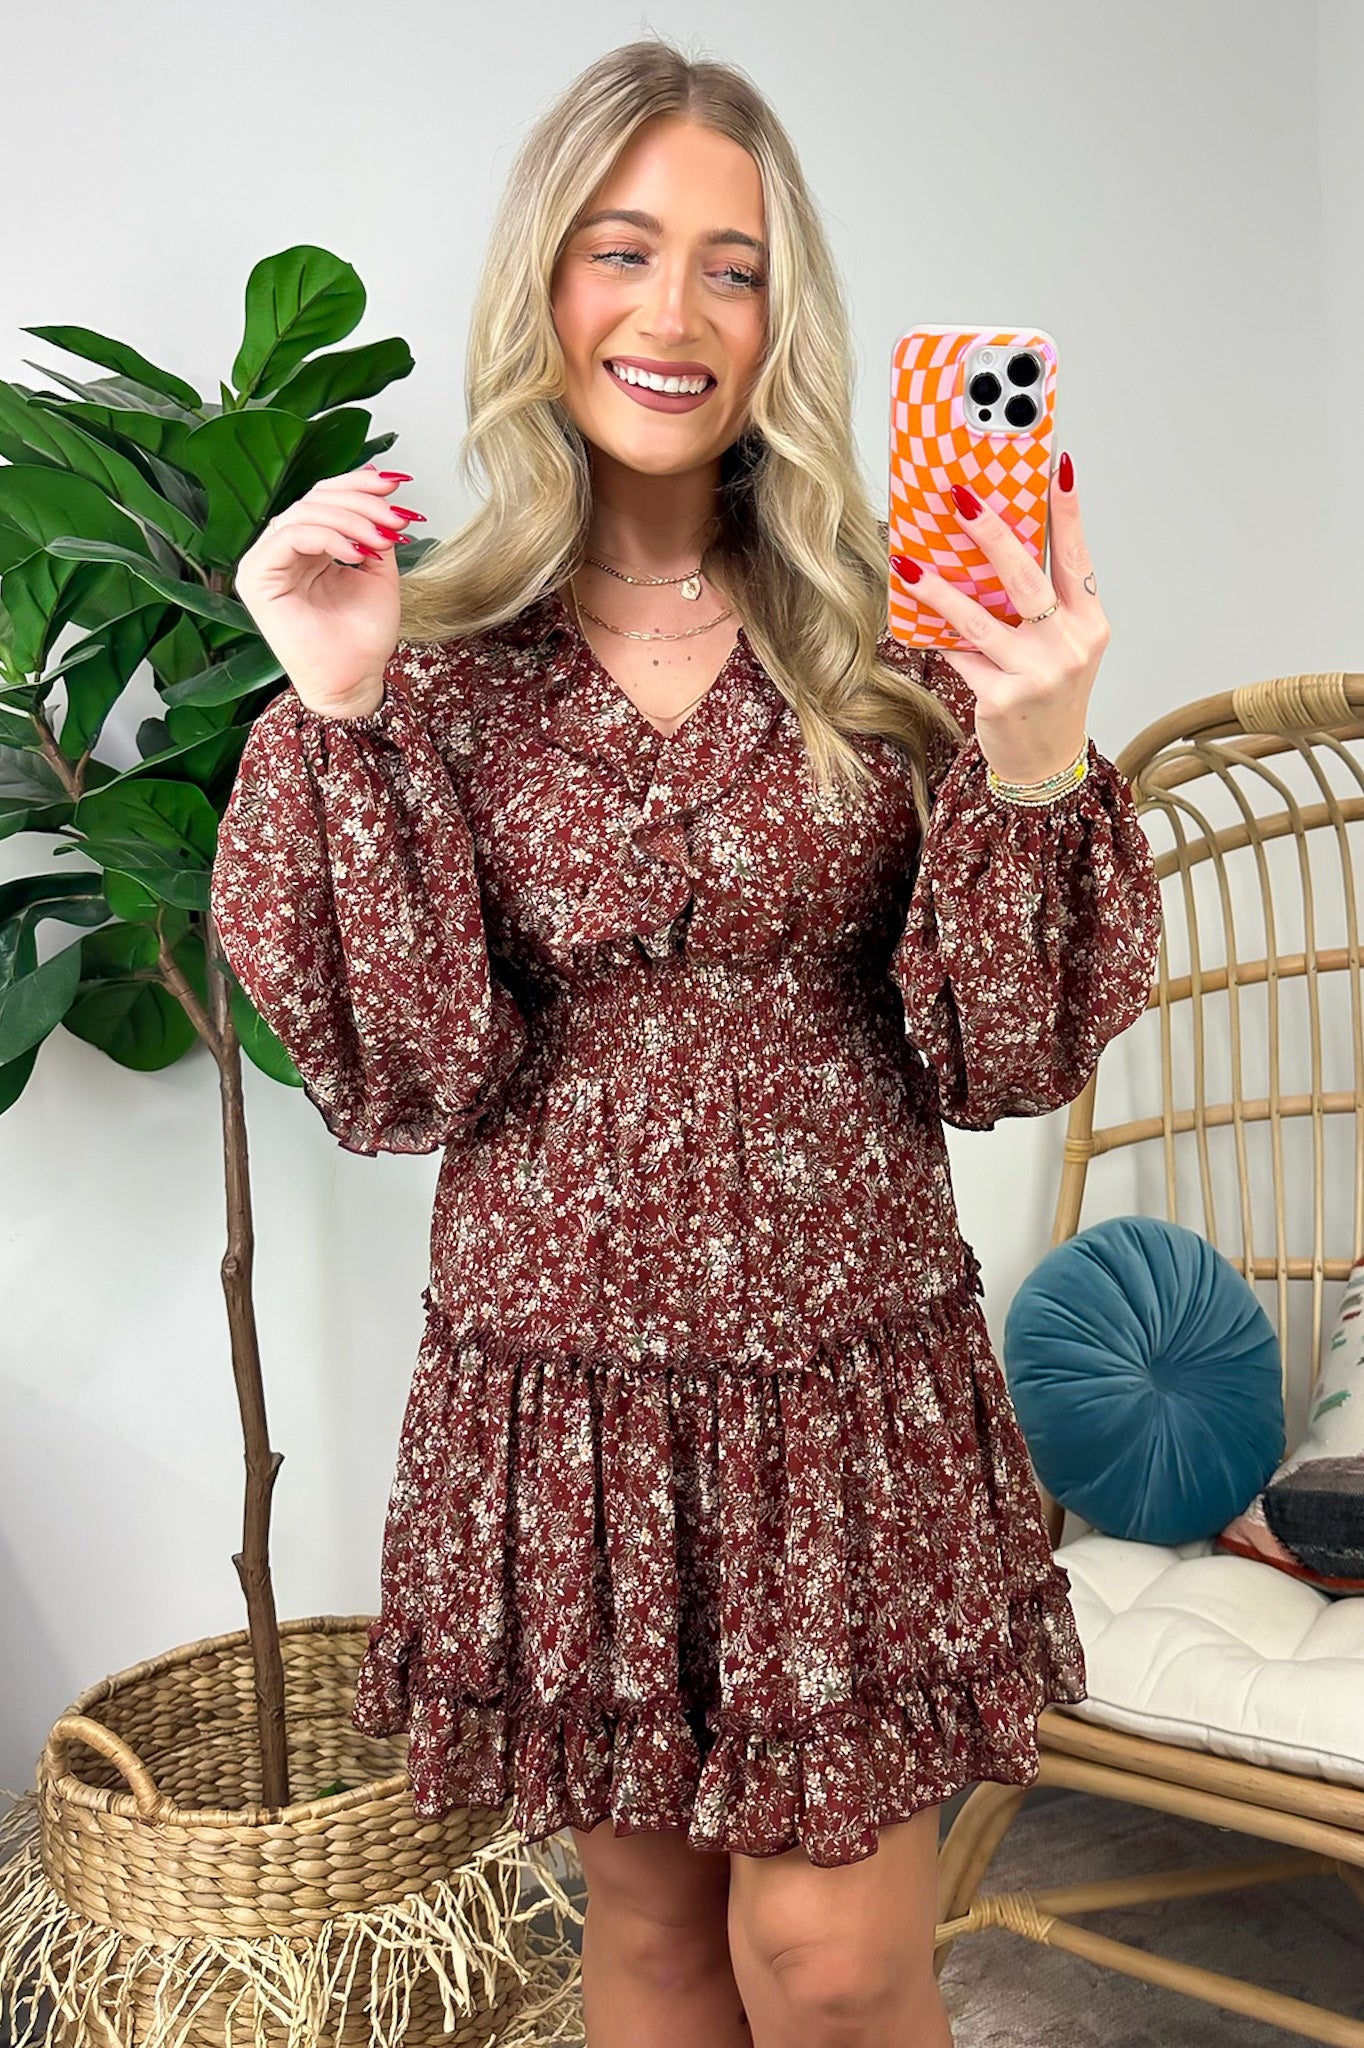  Abloom with Love Ruffled Smocked Floral Dress - FINAL SALE - Madison and Mallory